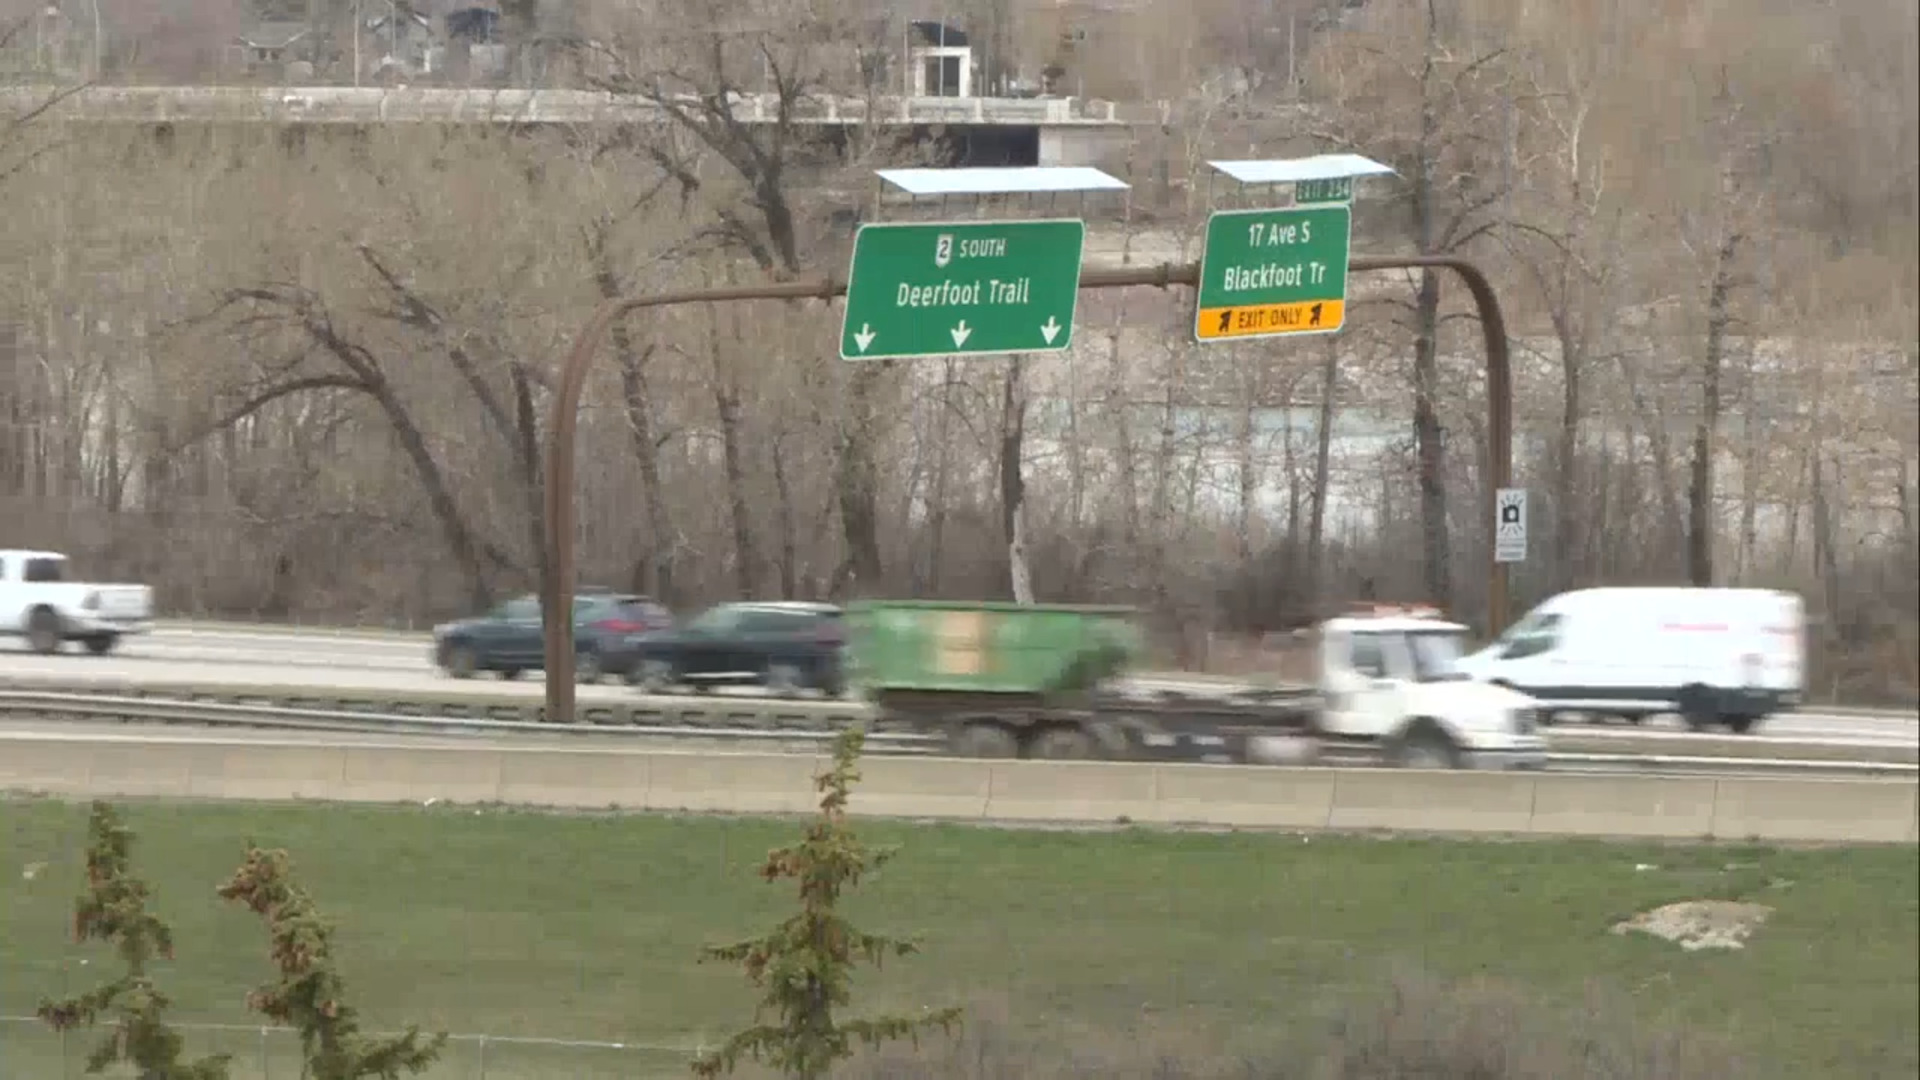 Part of Deerfoot Trail to close Monday night